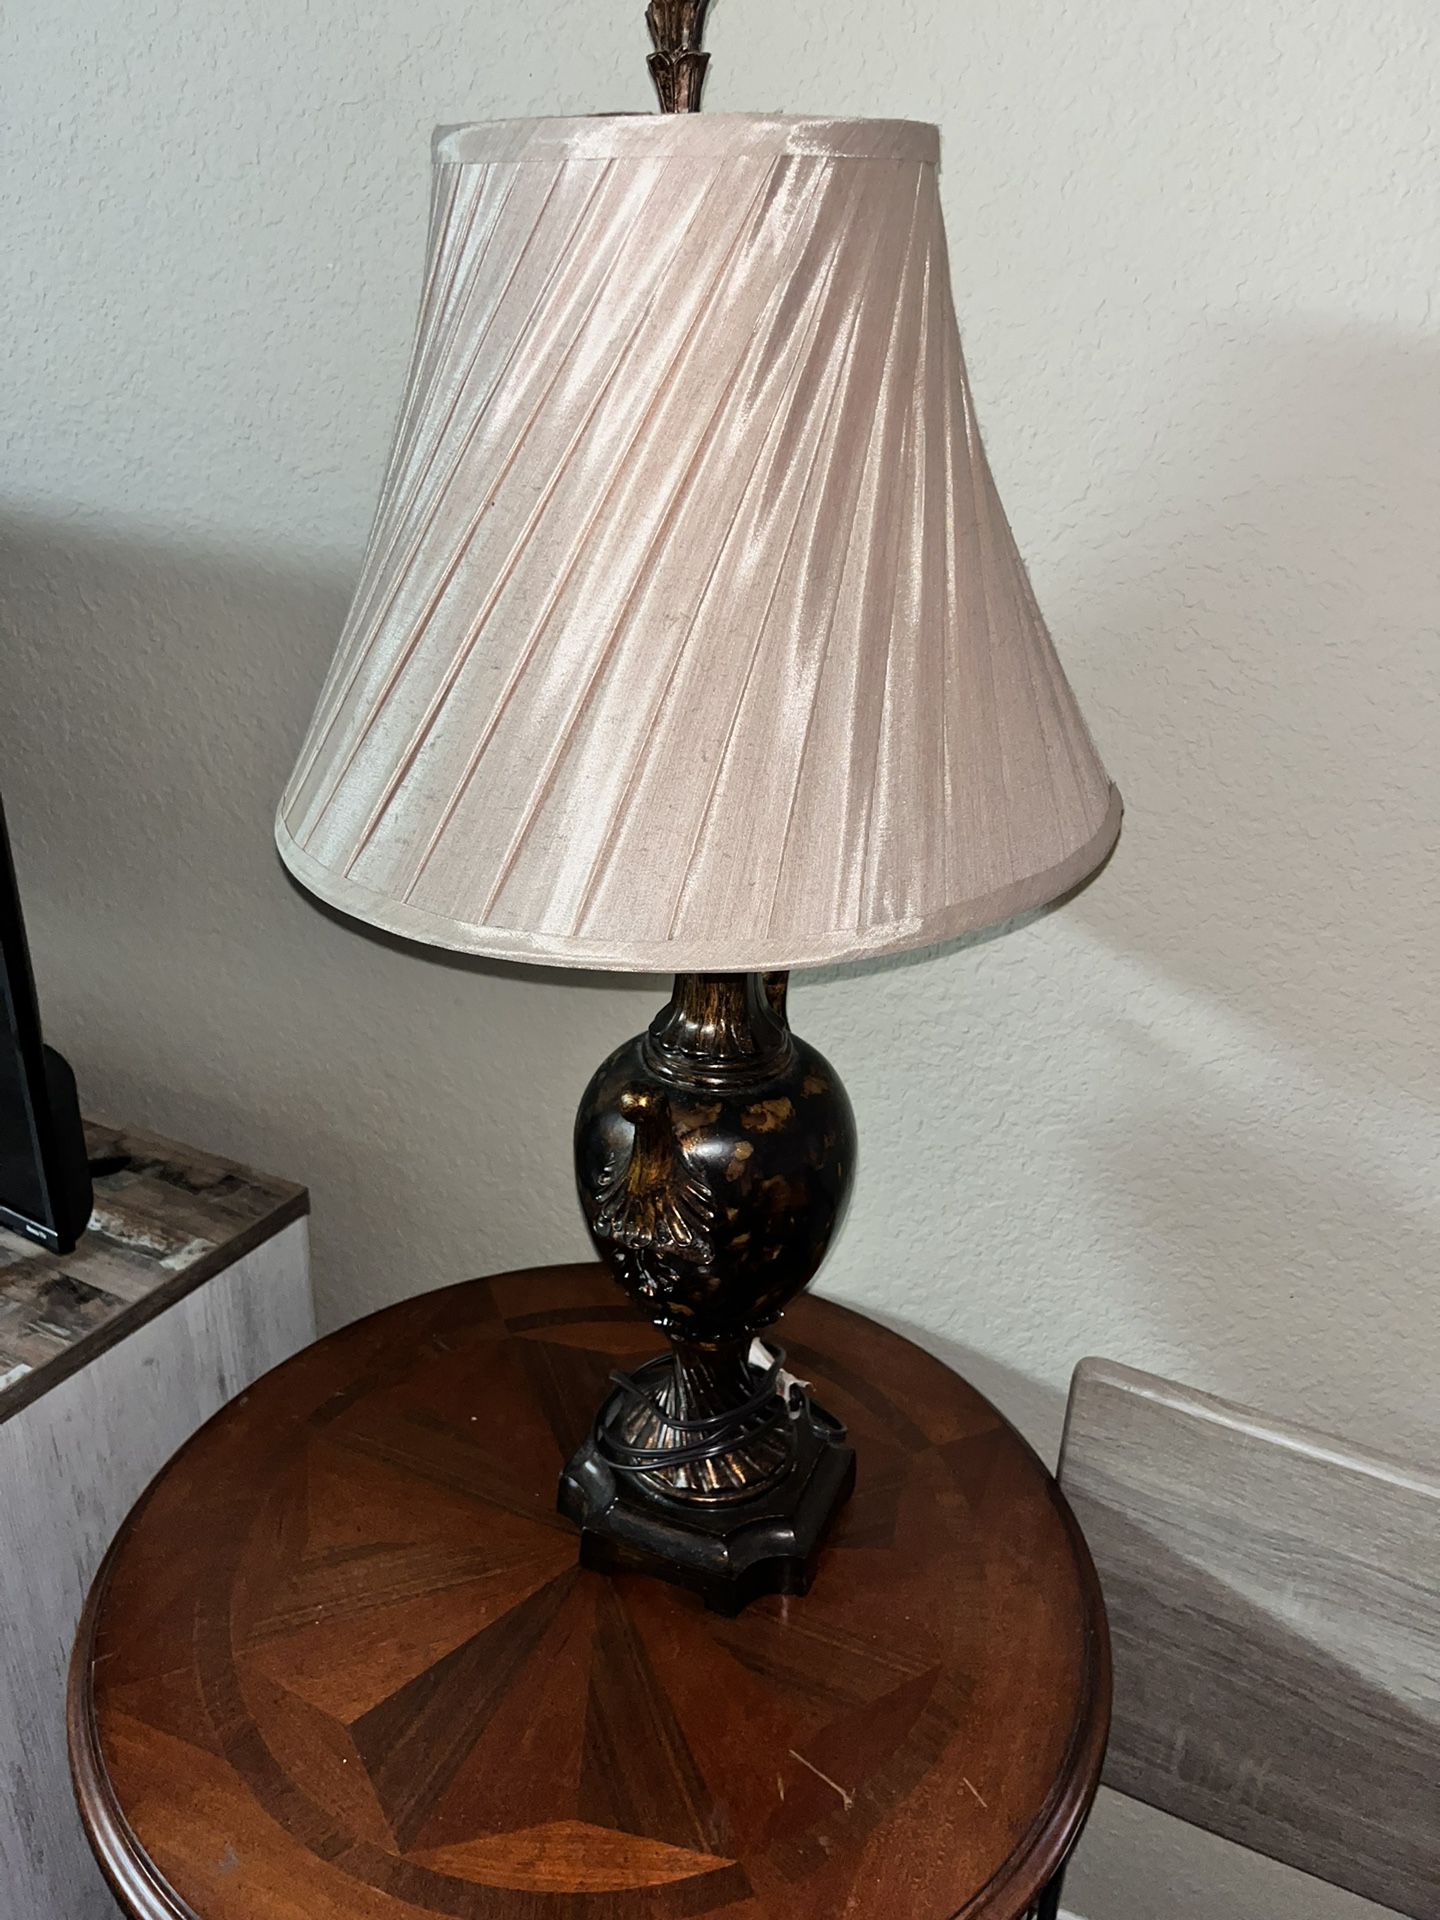 Two Lamps Buy Today !! Move Out Sale !! 5/19